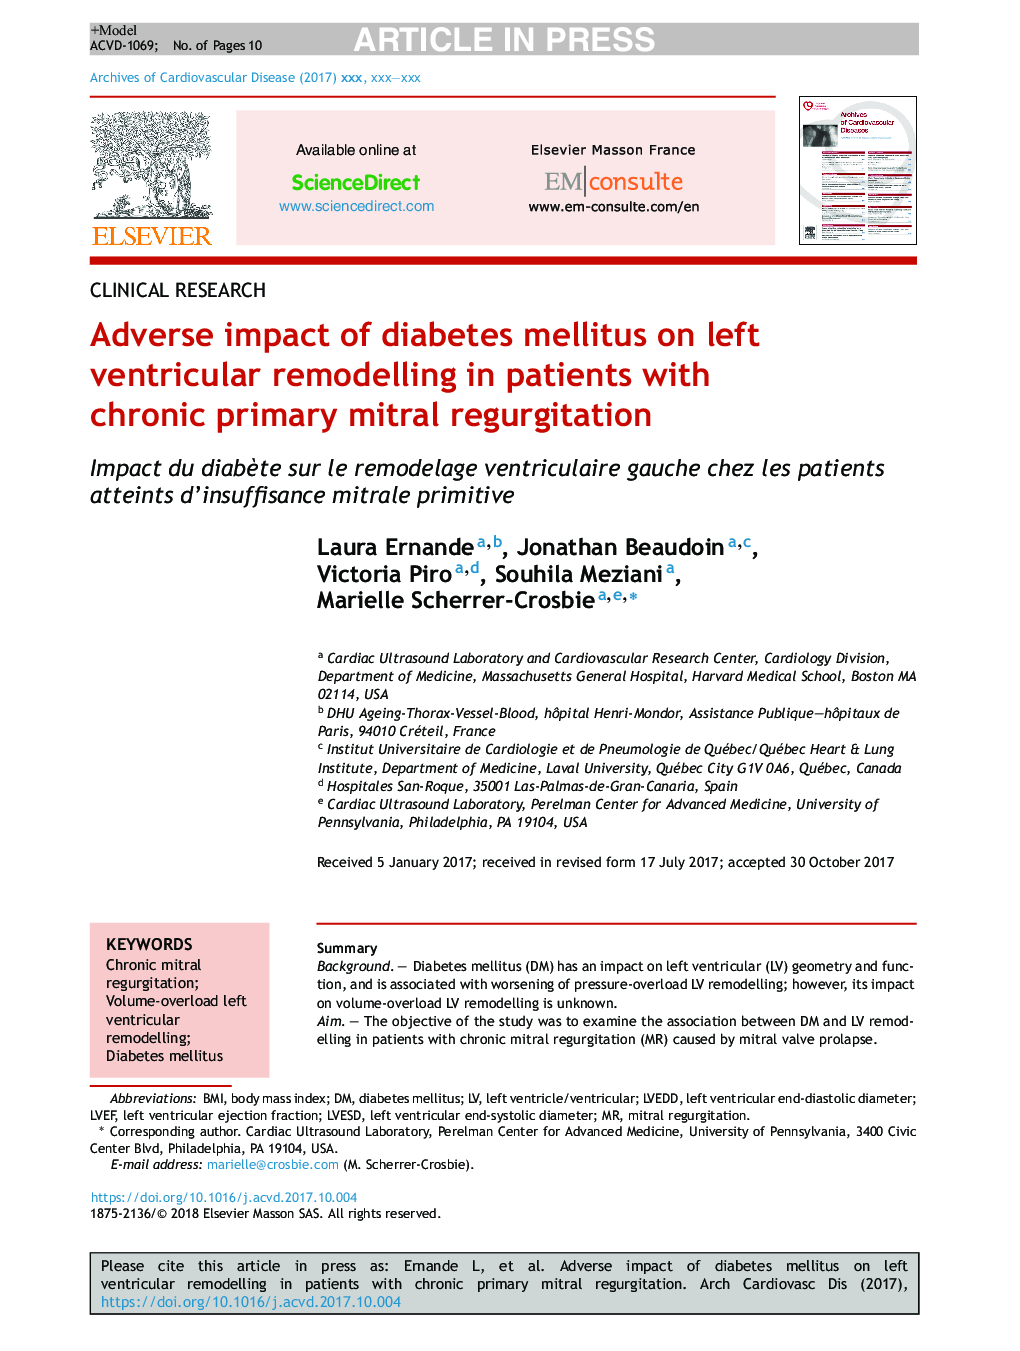 Adverse impact of diabetes mellitus on left ventricular remodelling in patients with chronic primary mitral regurgitation